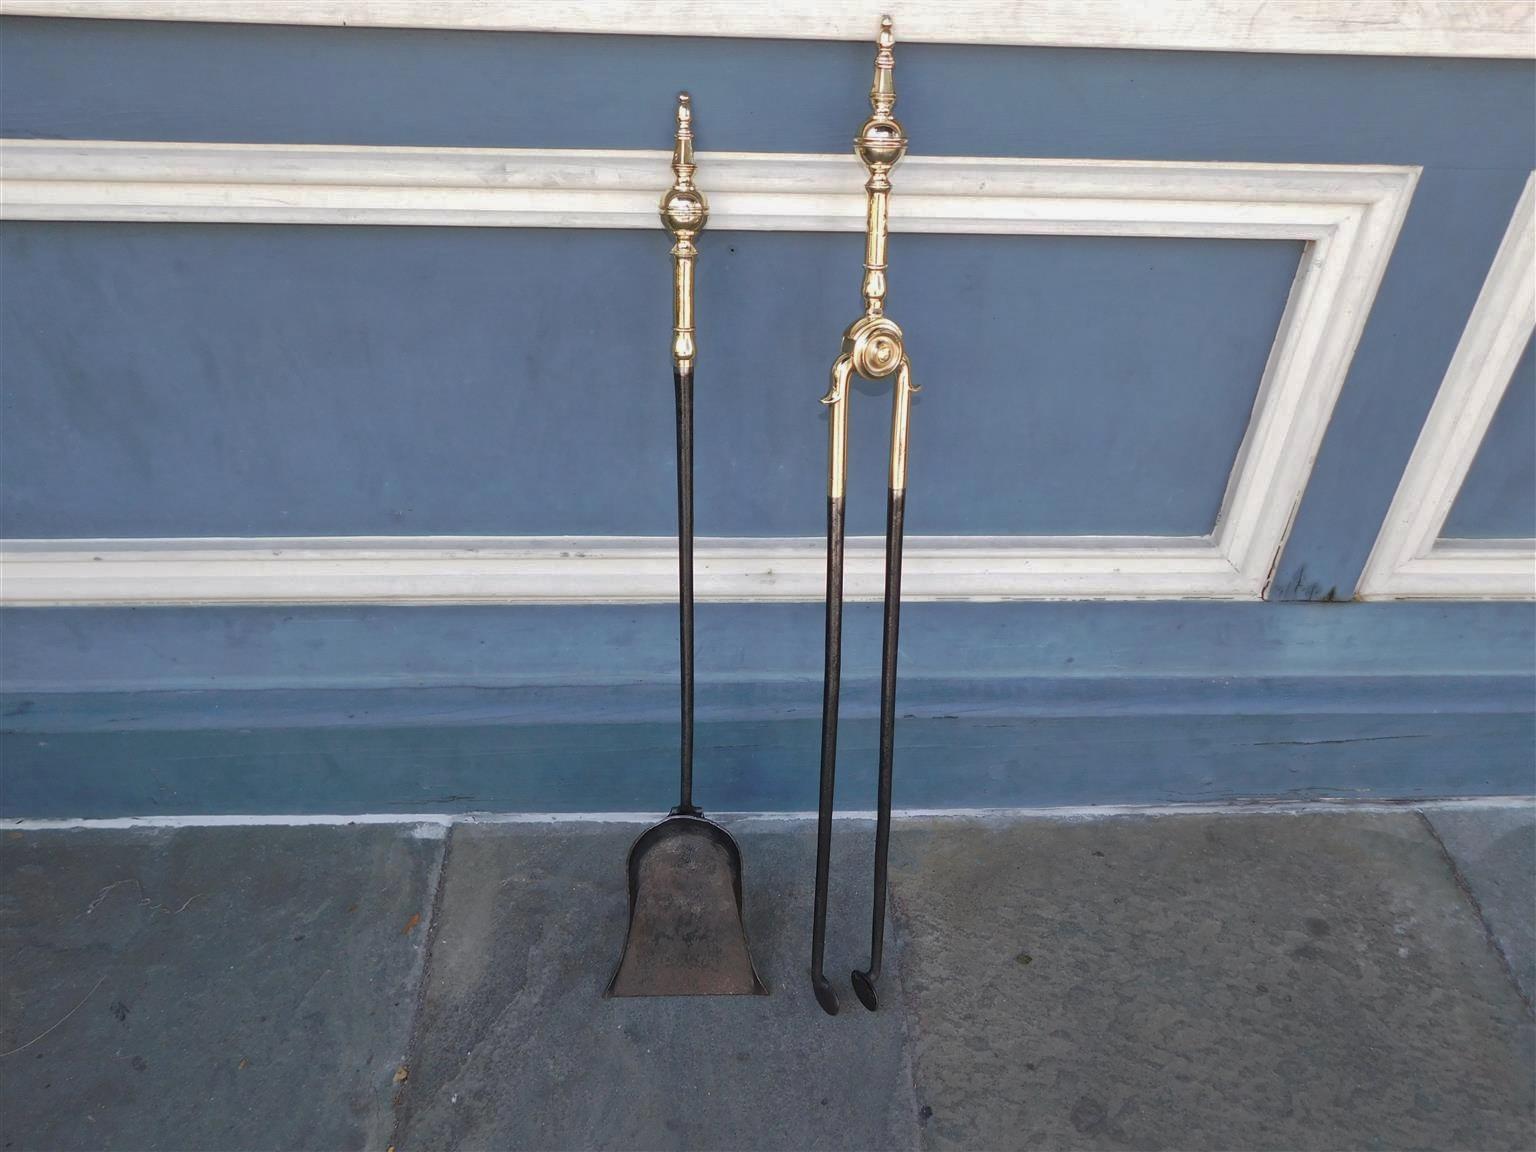 Pair of American brass and polished steel faceted steeple top finial fire tools with banded balls and decorative spurs. Early 19th century. Set consist of Tong and Shovel.